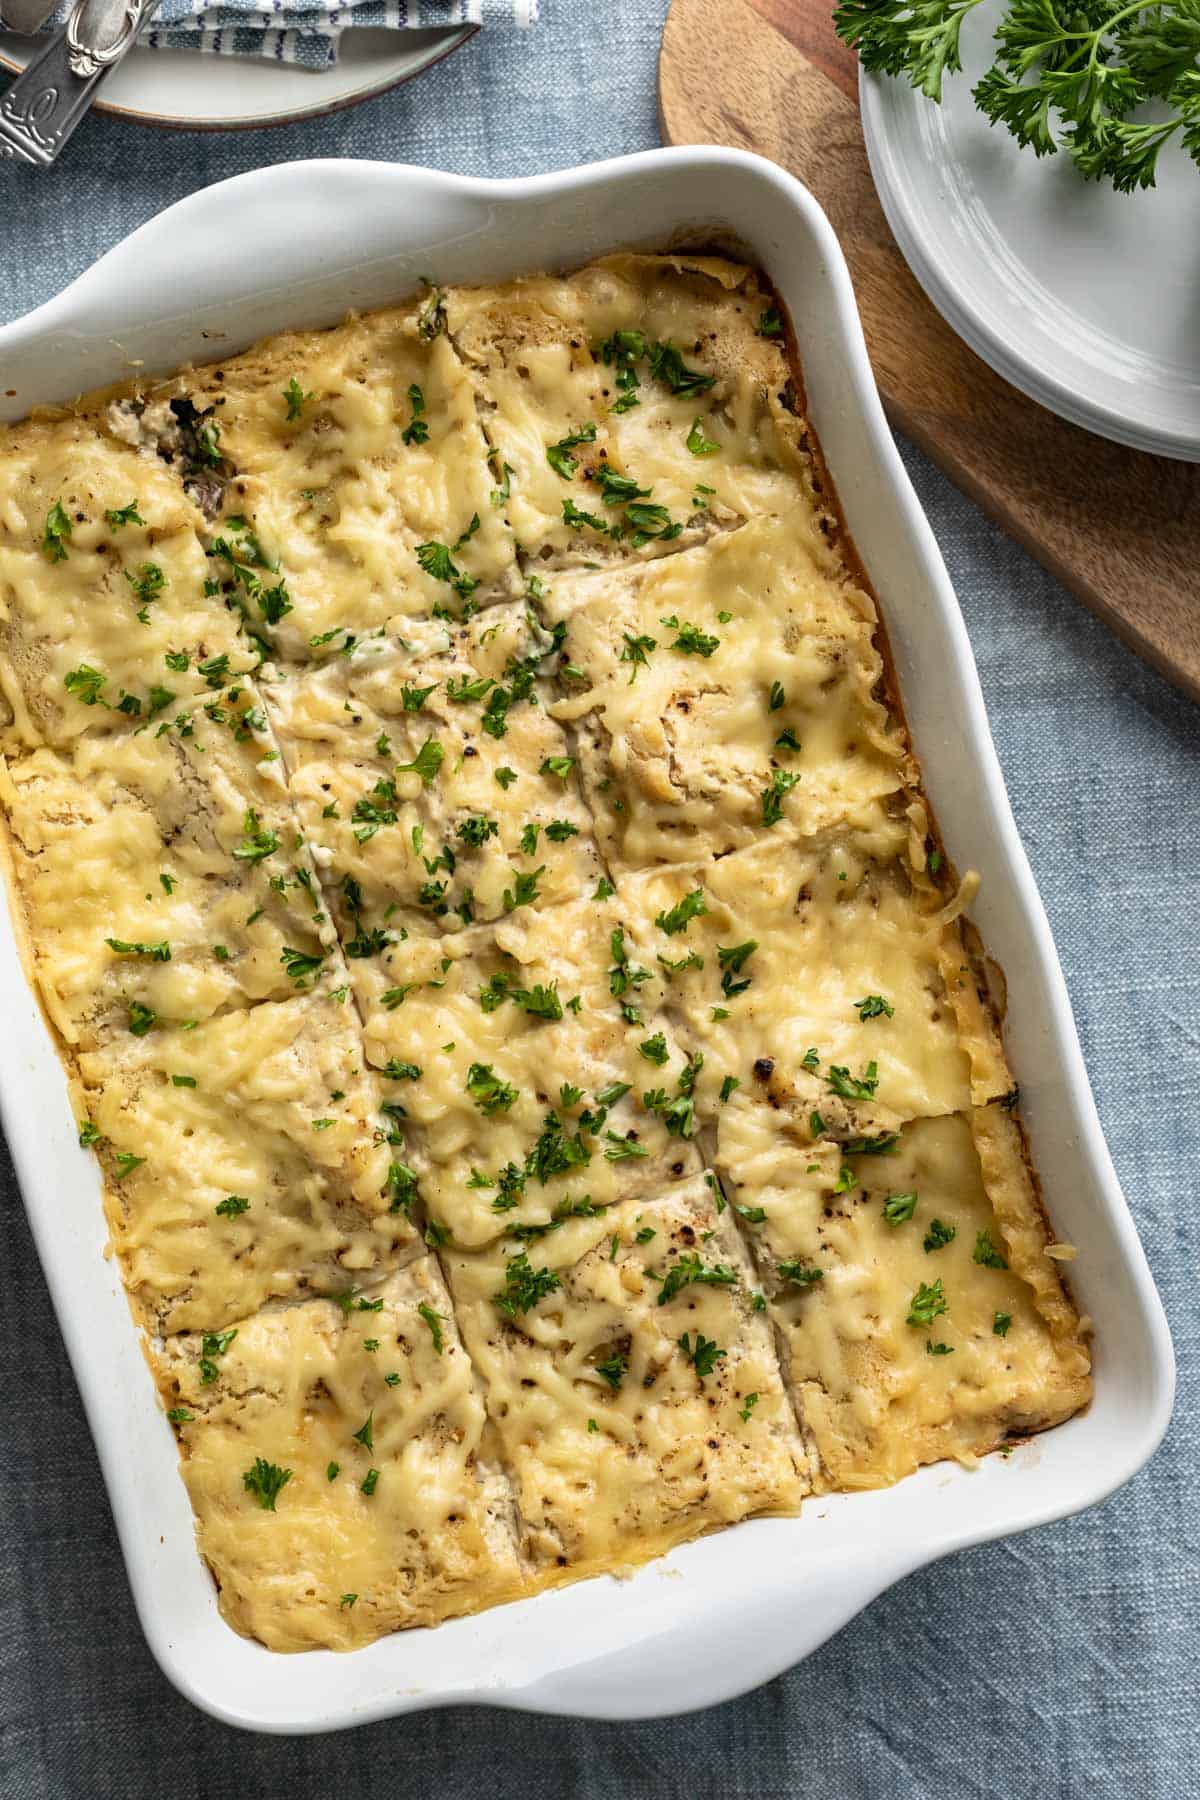 large white casserole dish filled with freshly baked cheesy vegan lasagna.